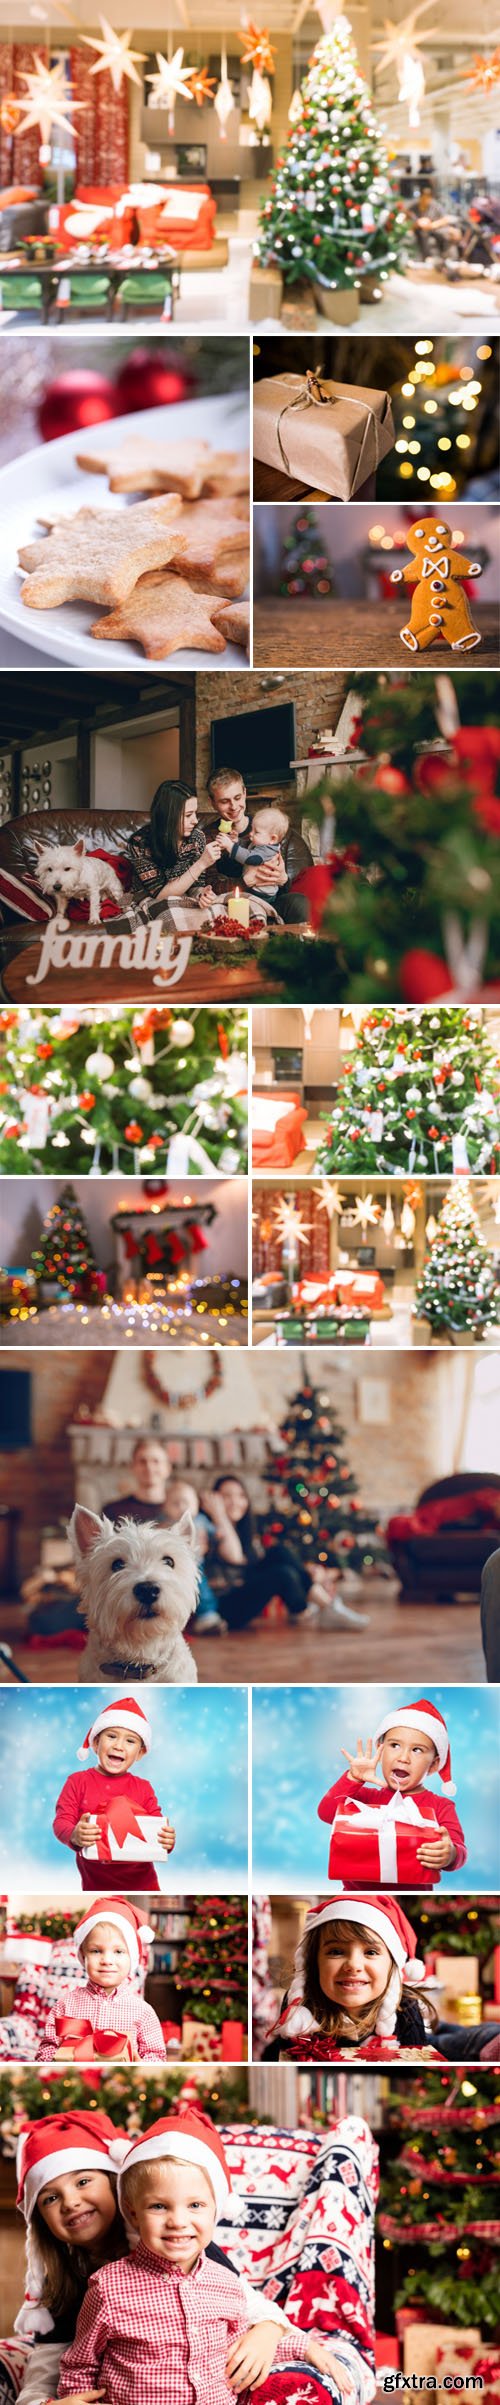 Defocused Christmas Scenes With Blurred Colorful Lights Photos